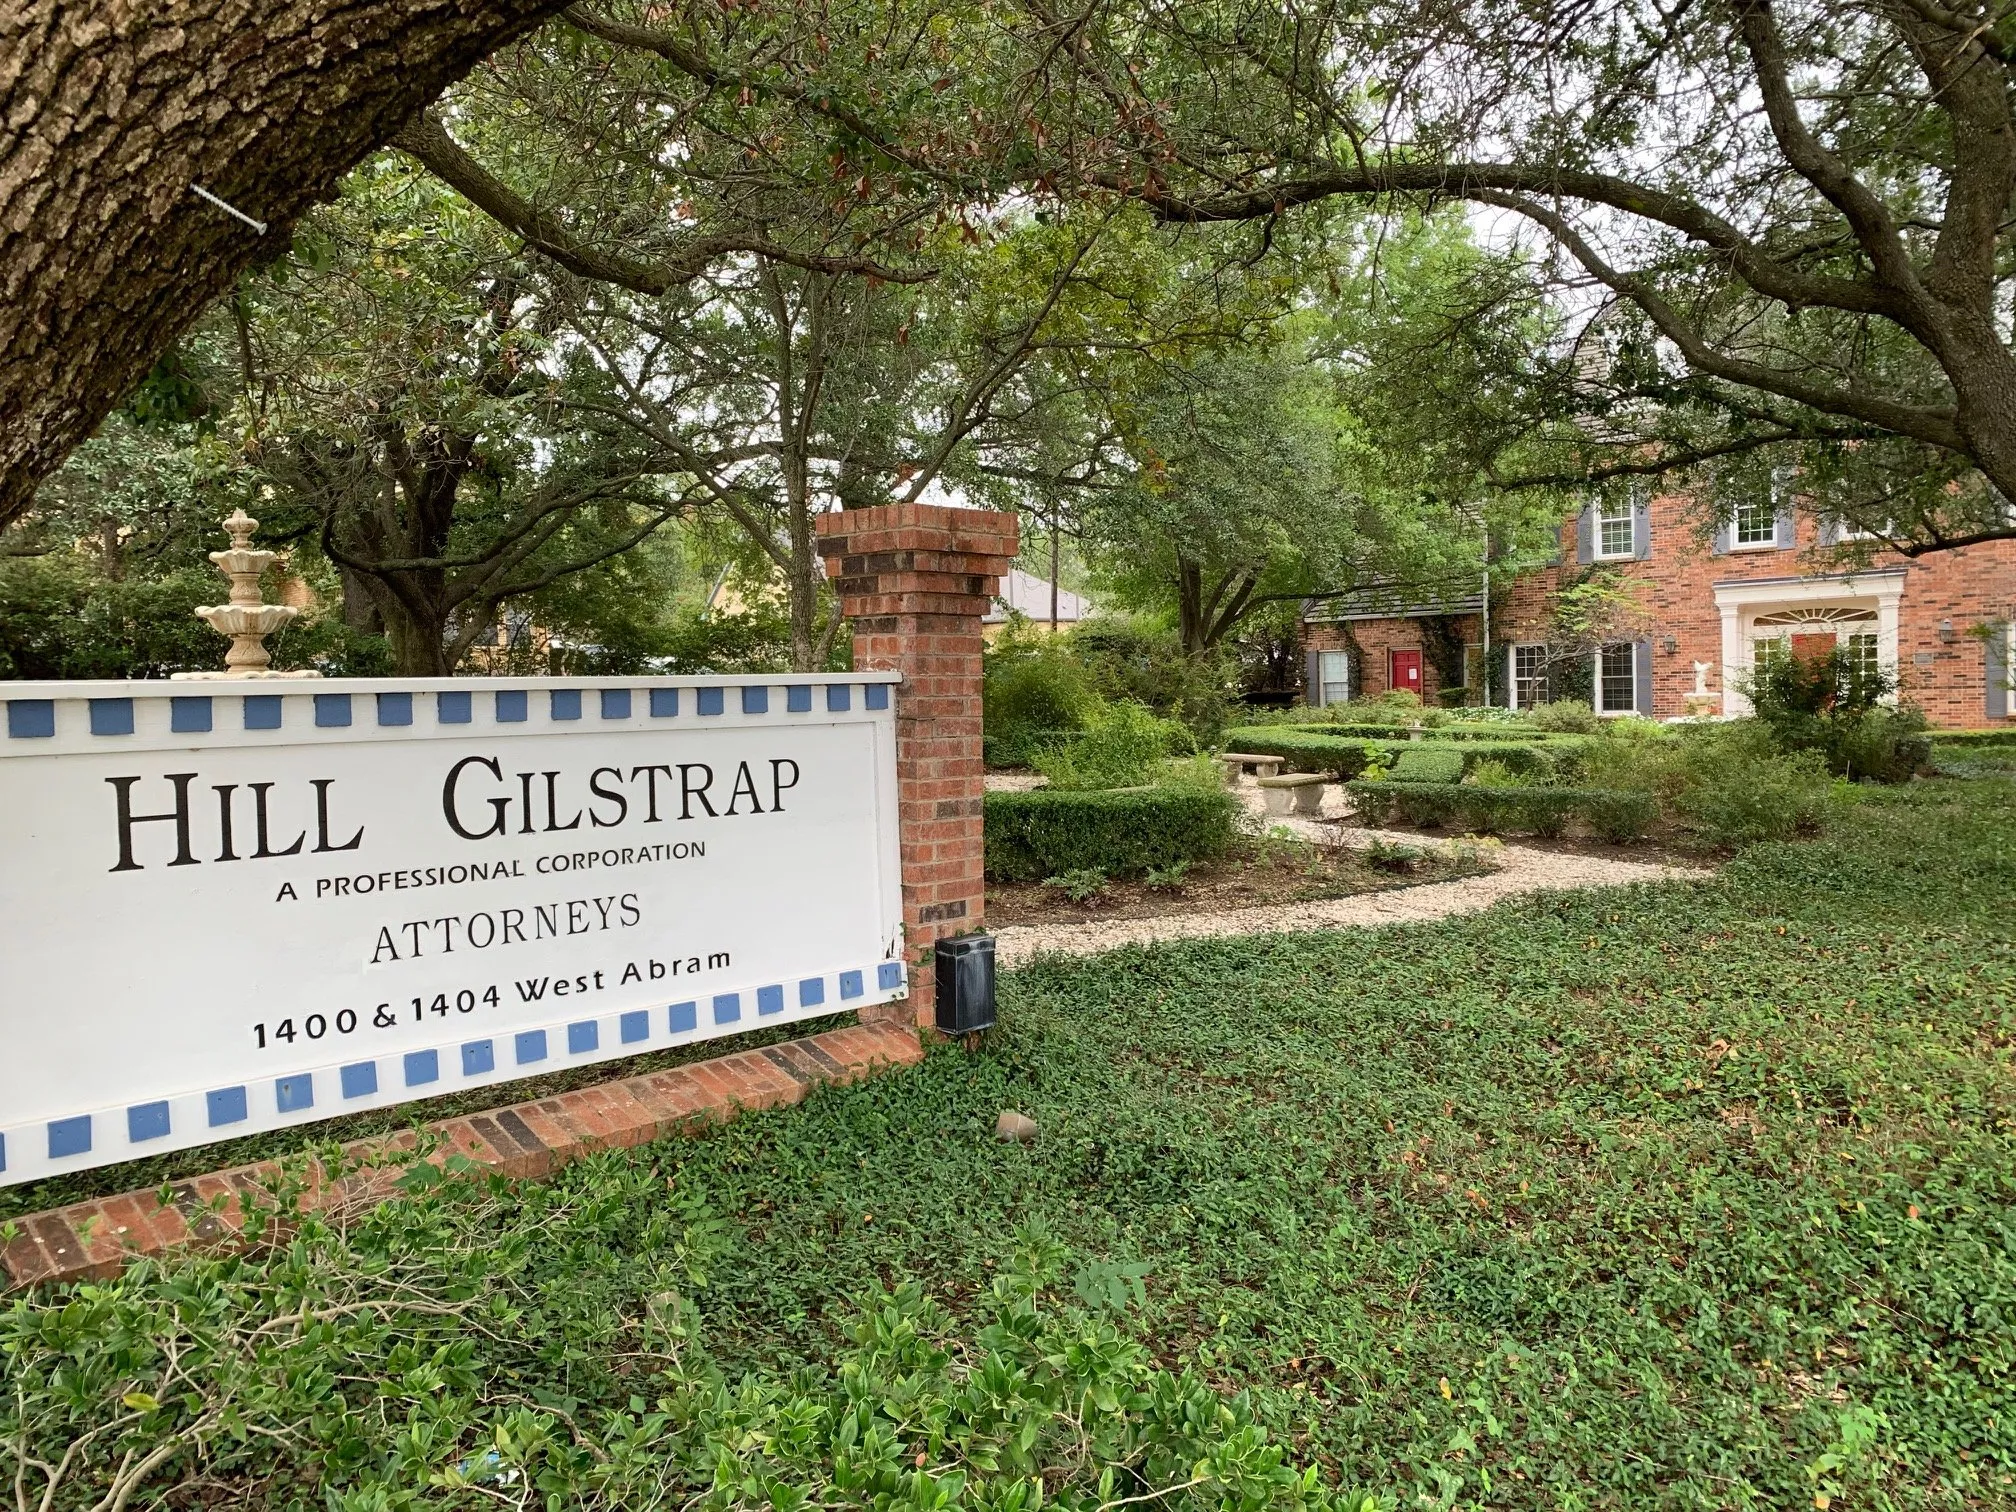 Hill Gilstrap Offices